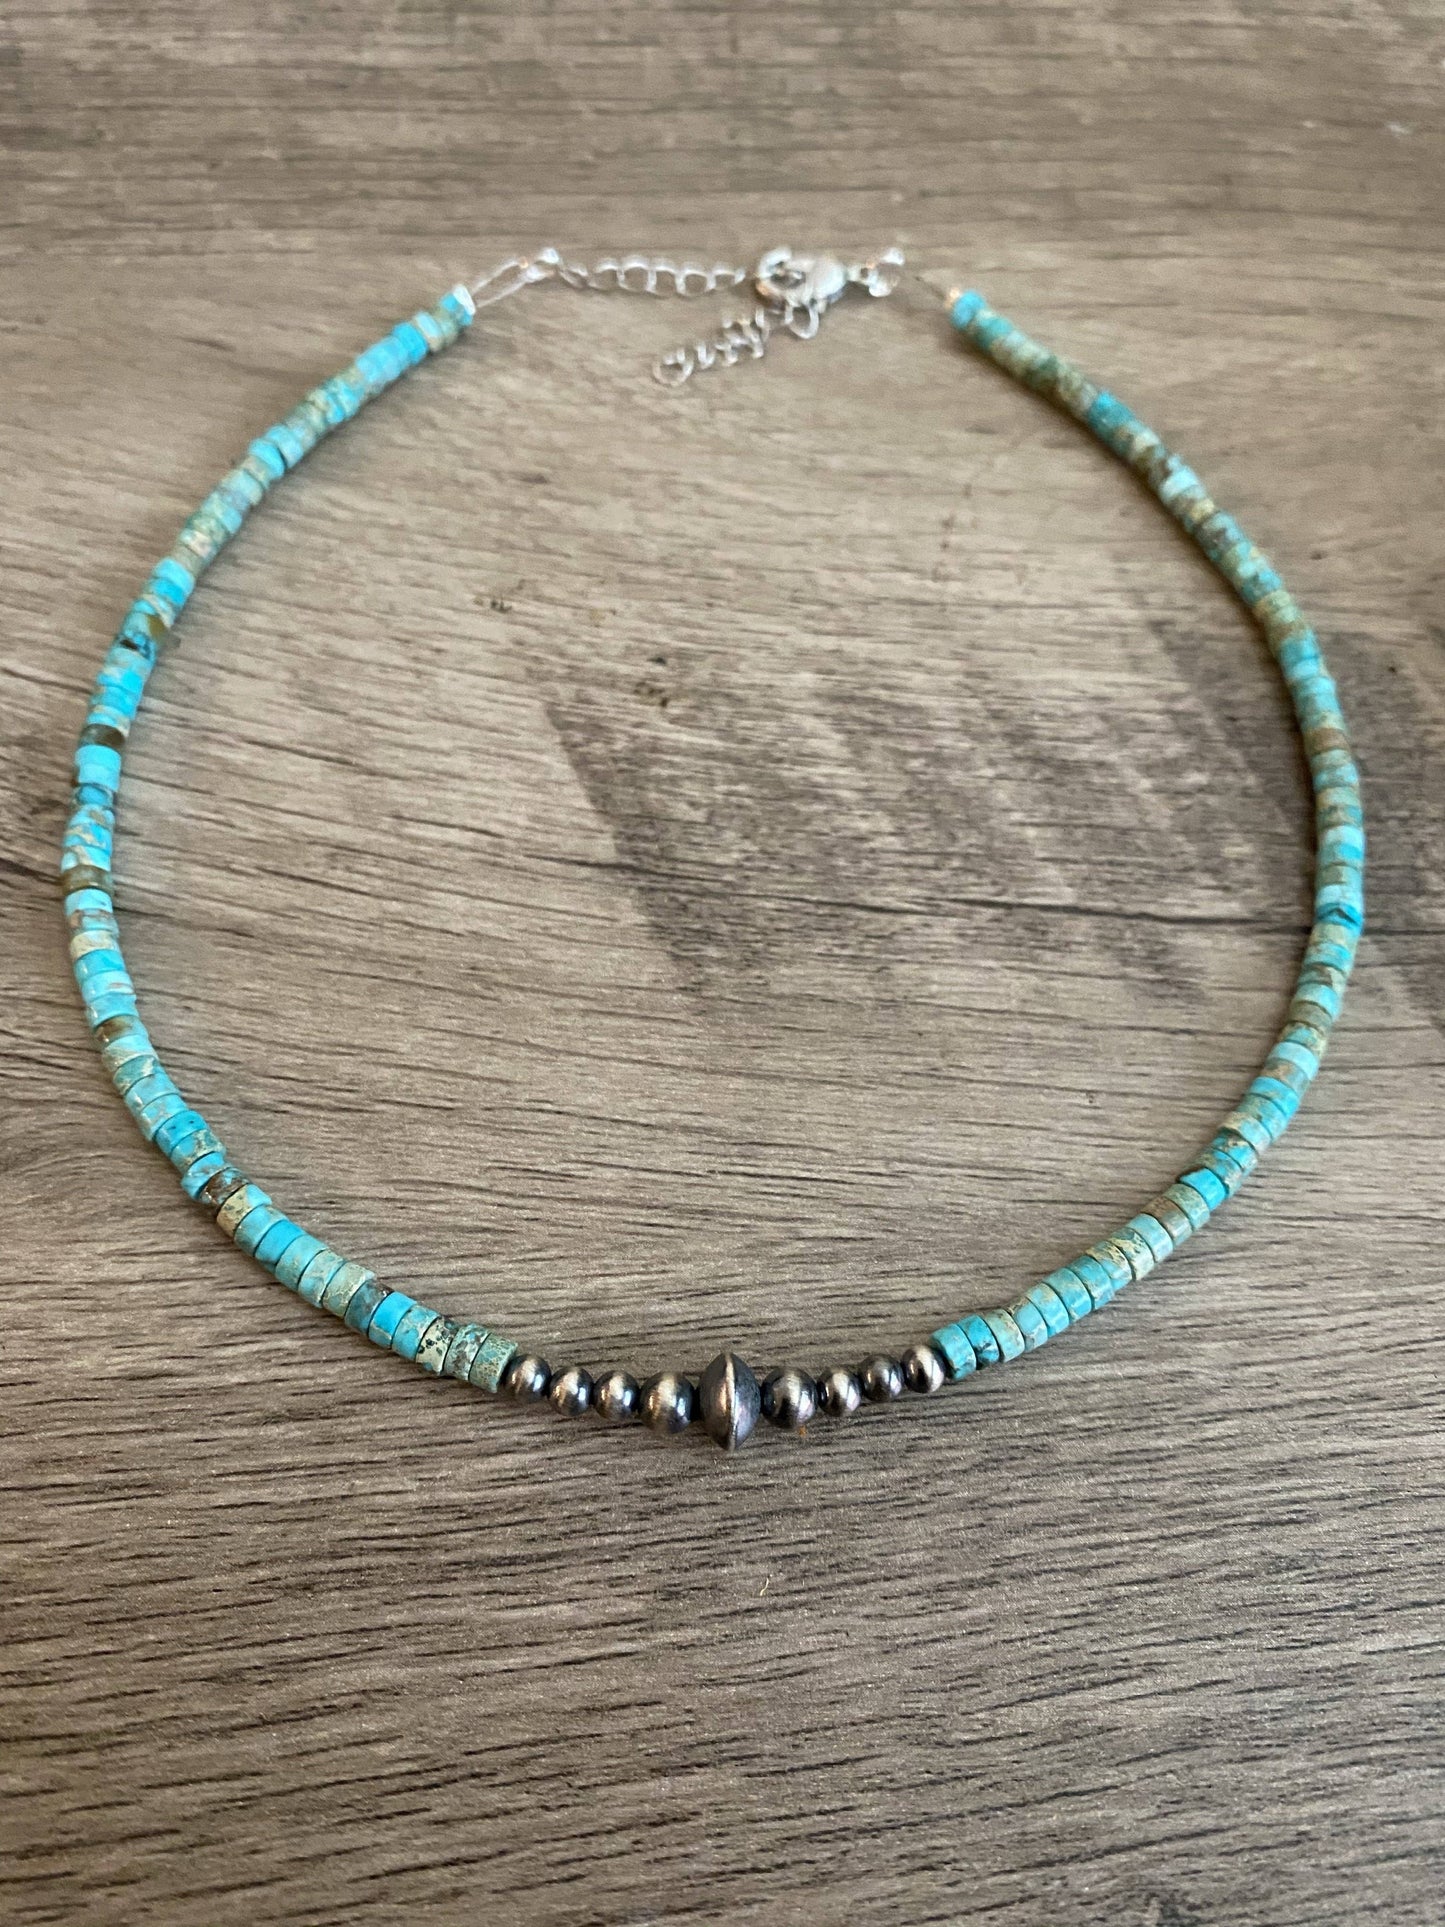 the Open the |Gate| Real Navajo choker with composite turquoise